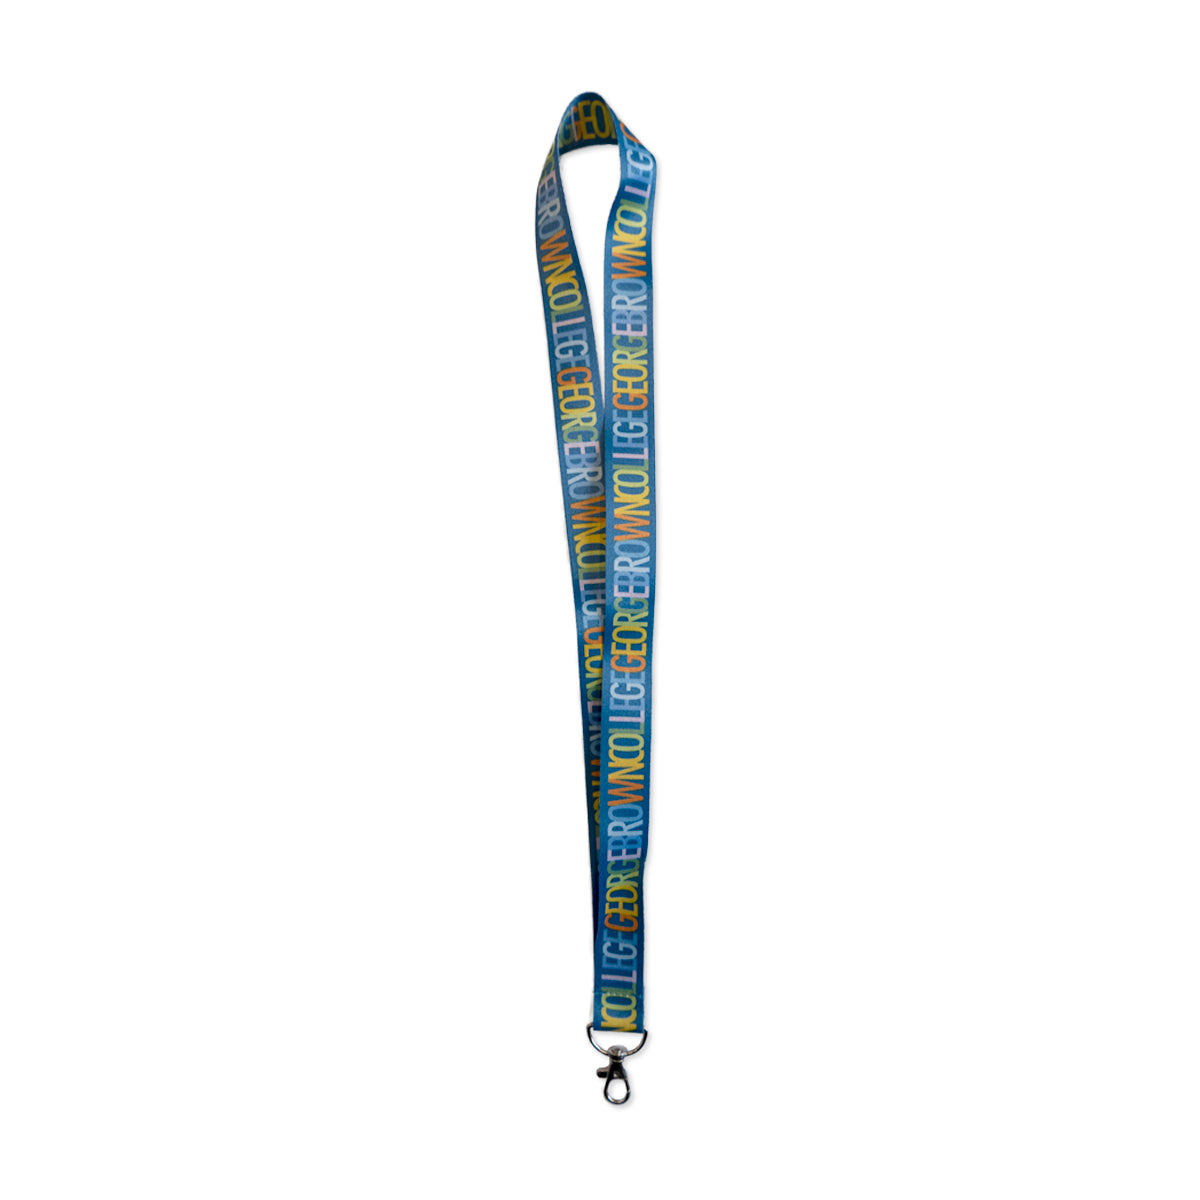 george brown college blue lanyard with colourful text